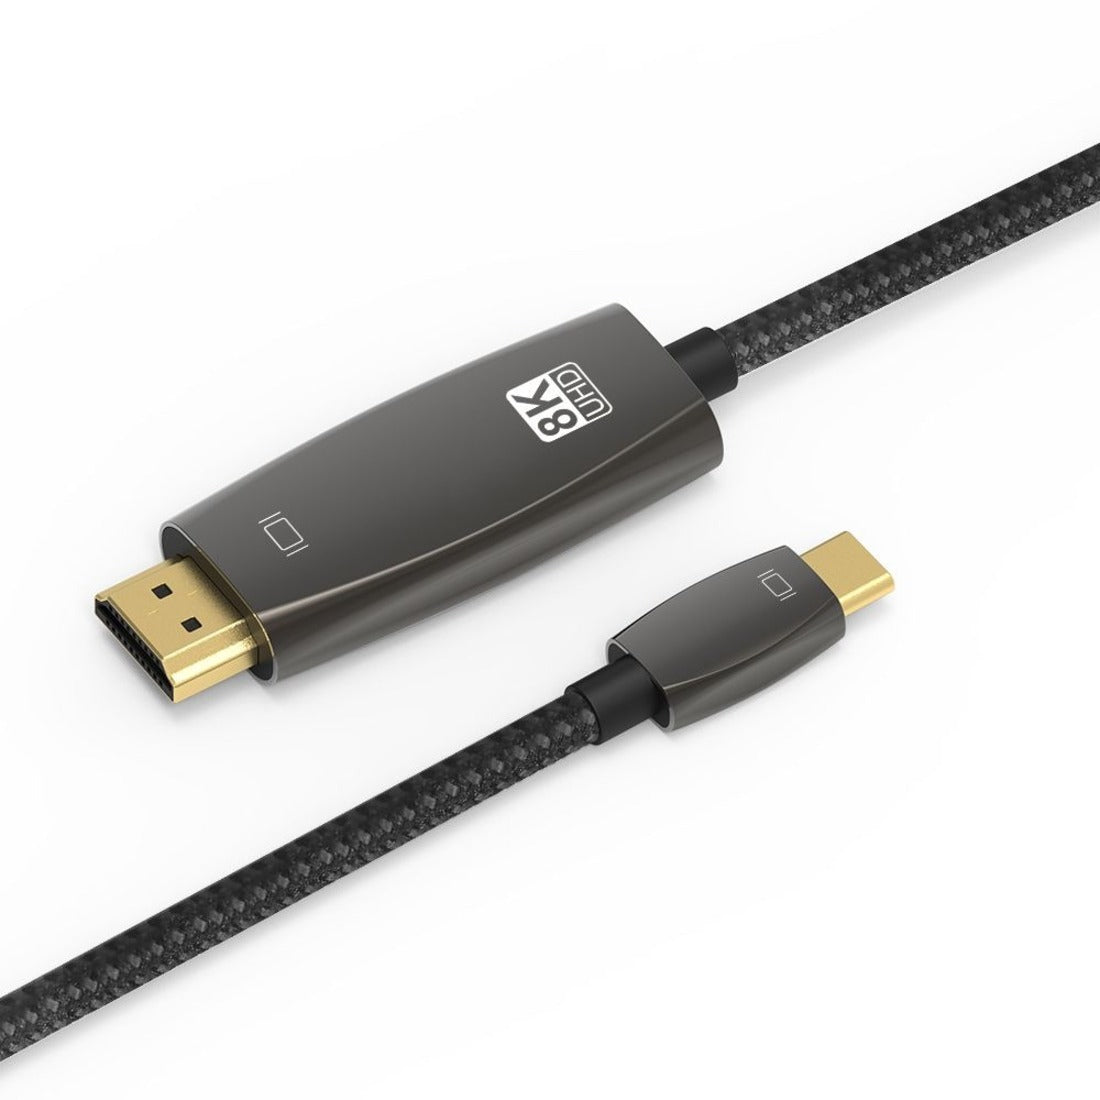 4XEM 4XTPC023B2M 8K/4K 2M USB-C to HDMI Cable, Plug & Play, Active, 32.4 Gbit/s Data Transfer Rate, 7680 x 4320 Supported Resolution